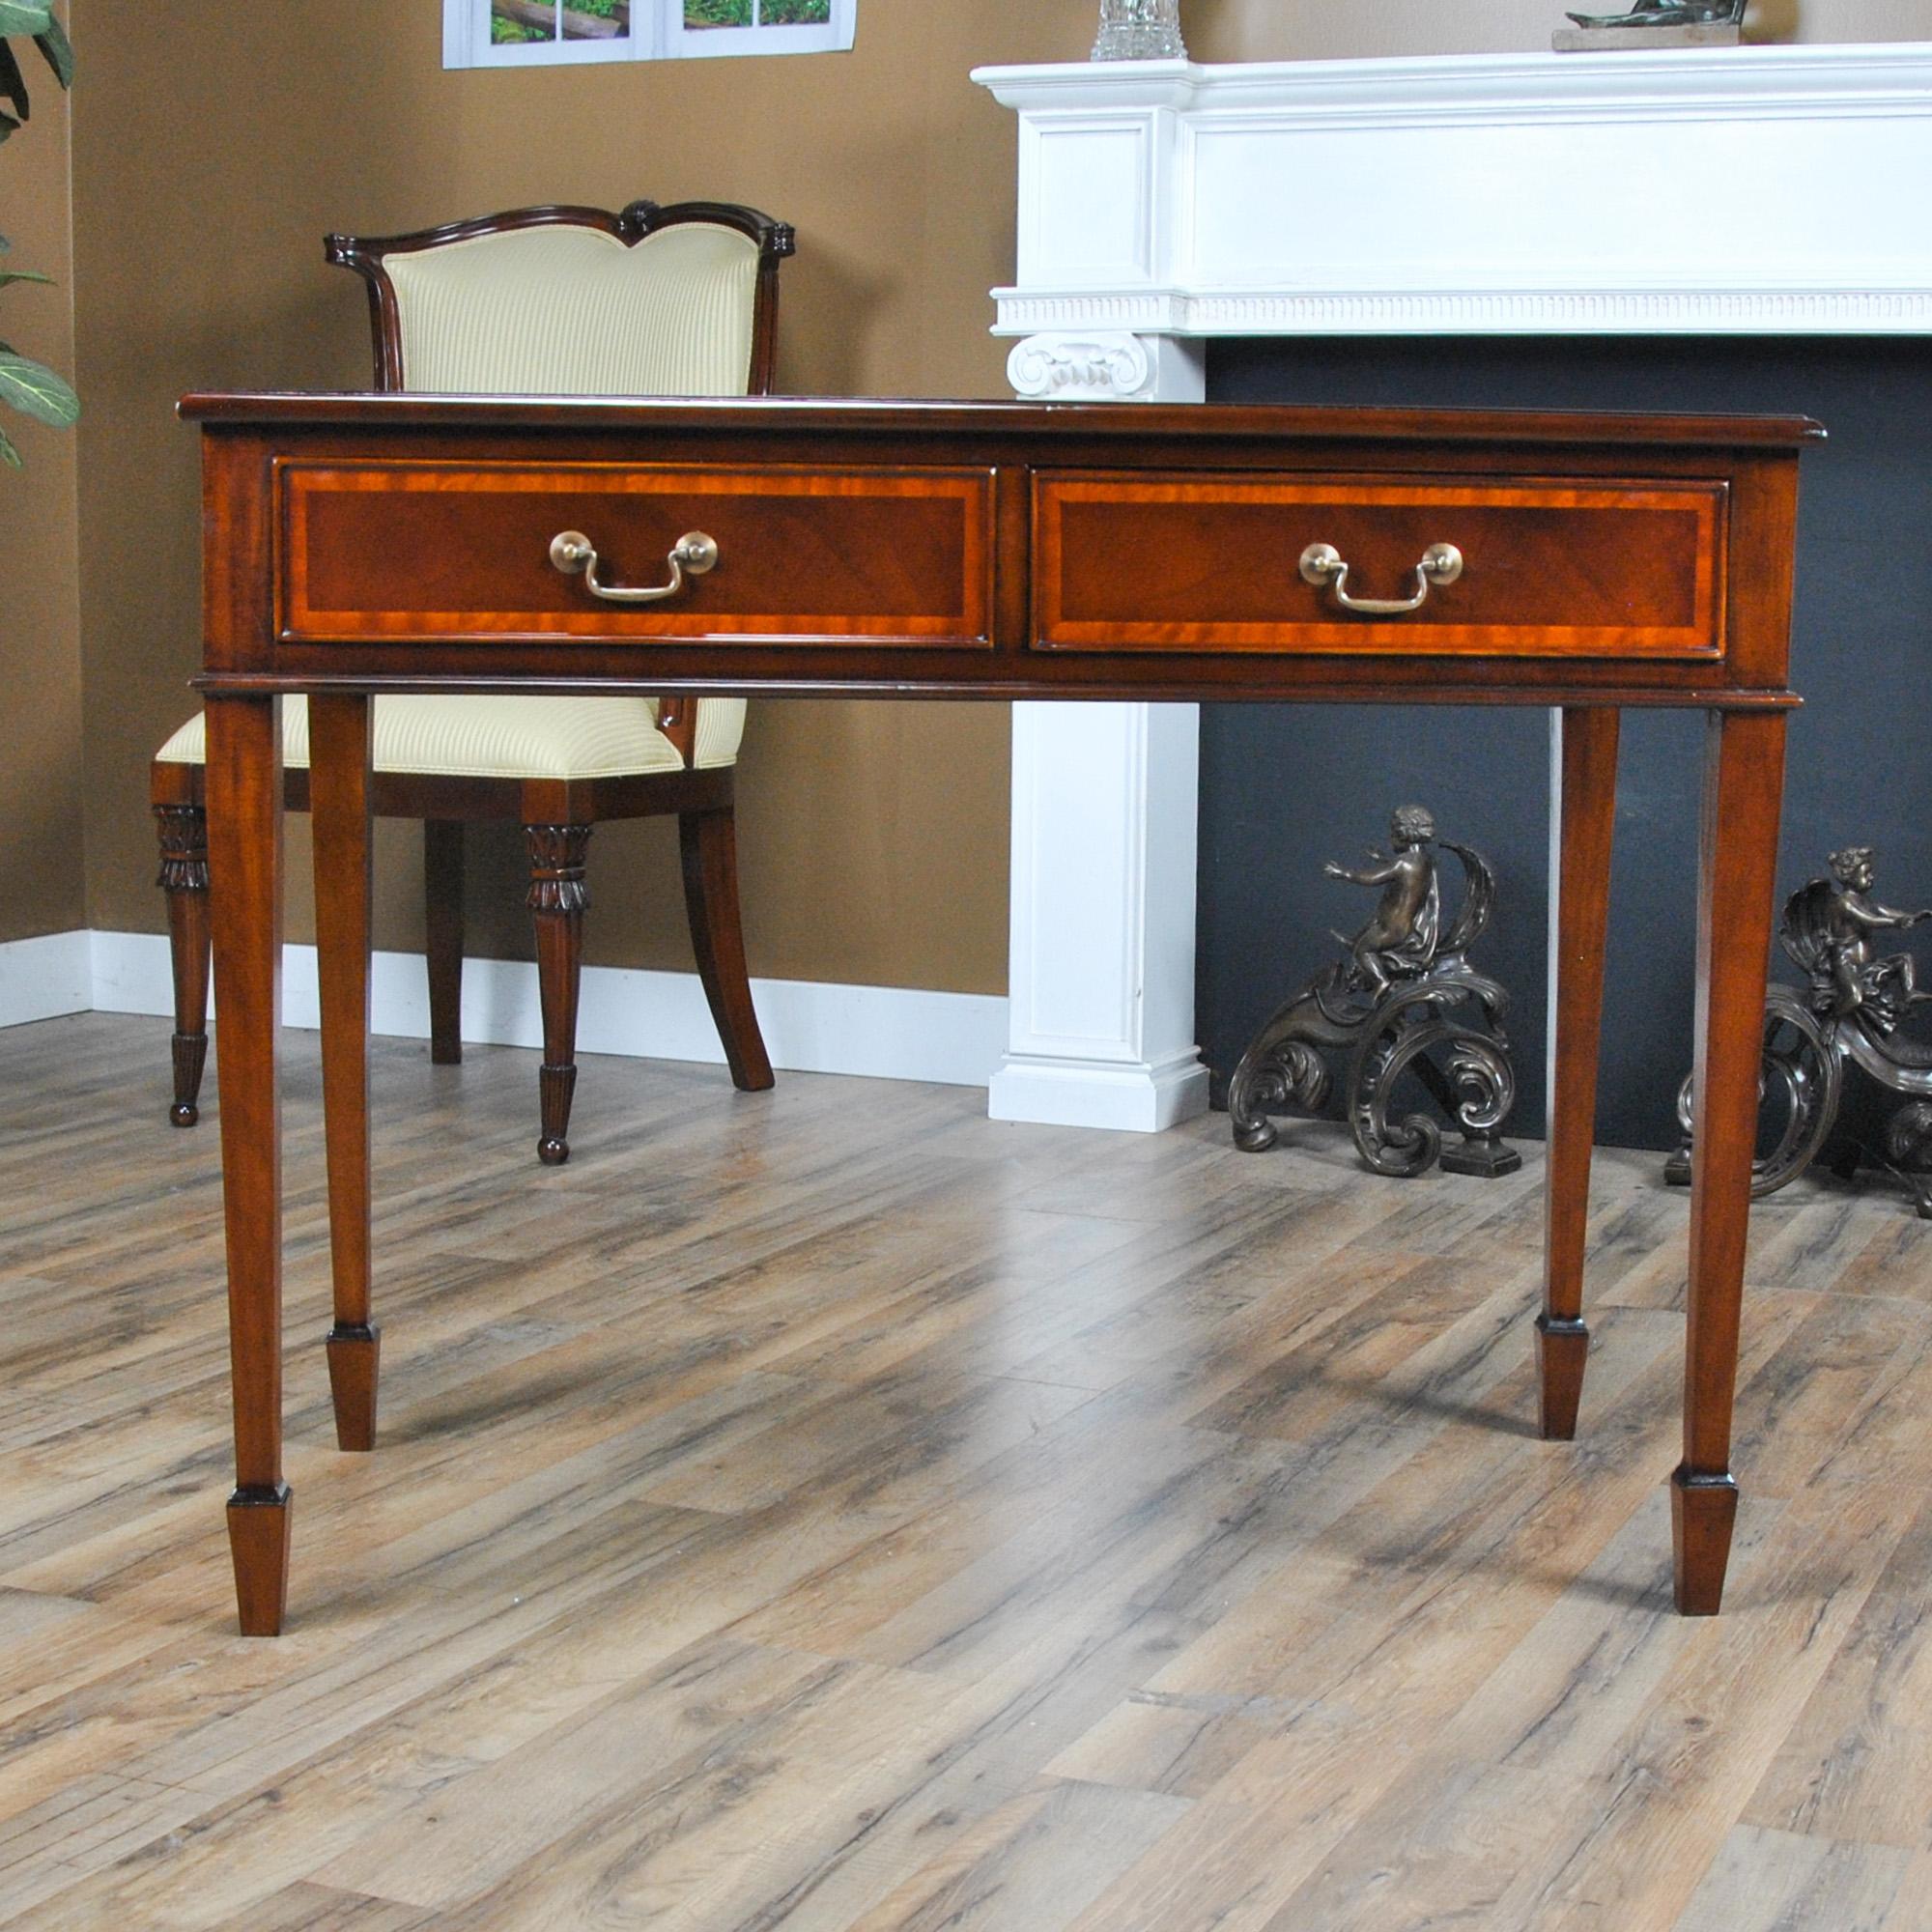 A high quality Small Mahogany Banded Desk from Niagara Furniture made of mahogany and satinwood with solid brass drawer pulls. The two dovetailed drawers denote high quality construction and the elegant tapered legs end in a popular spade foot